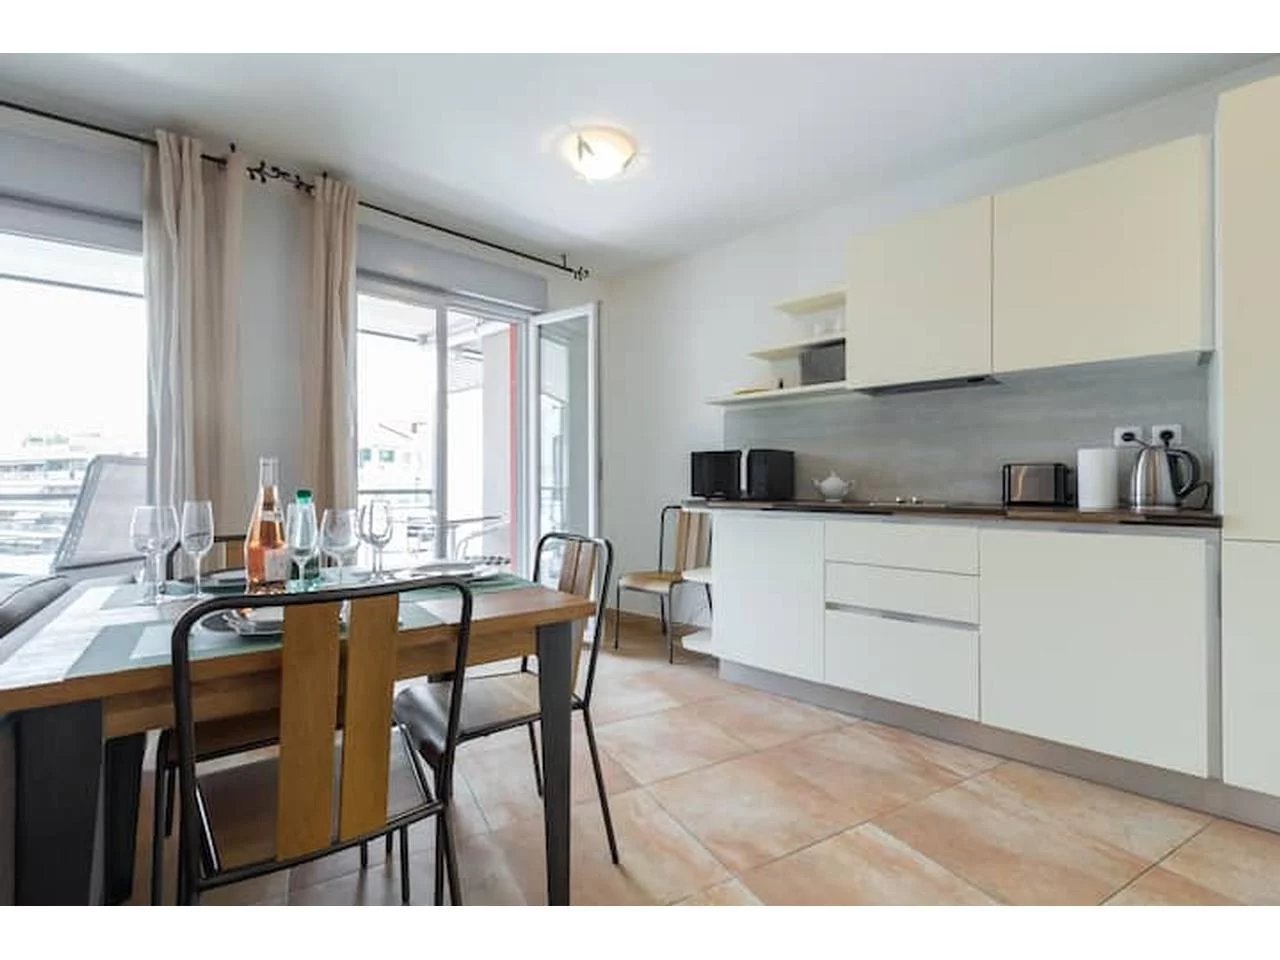 Appartement  3 Rooms 64.23m2  for sale   750 000 €